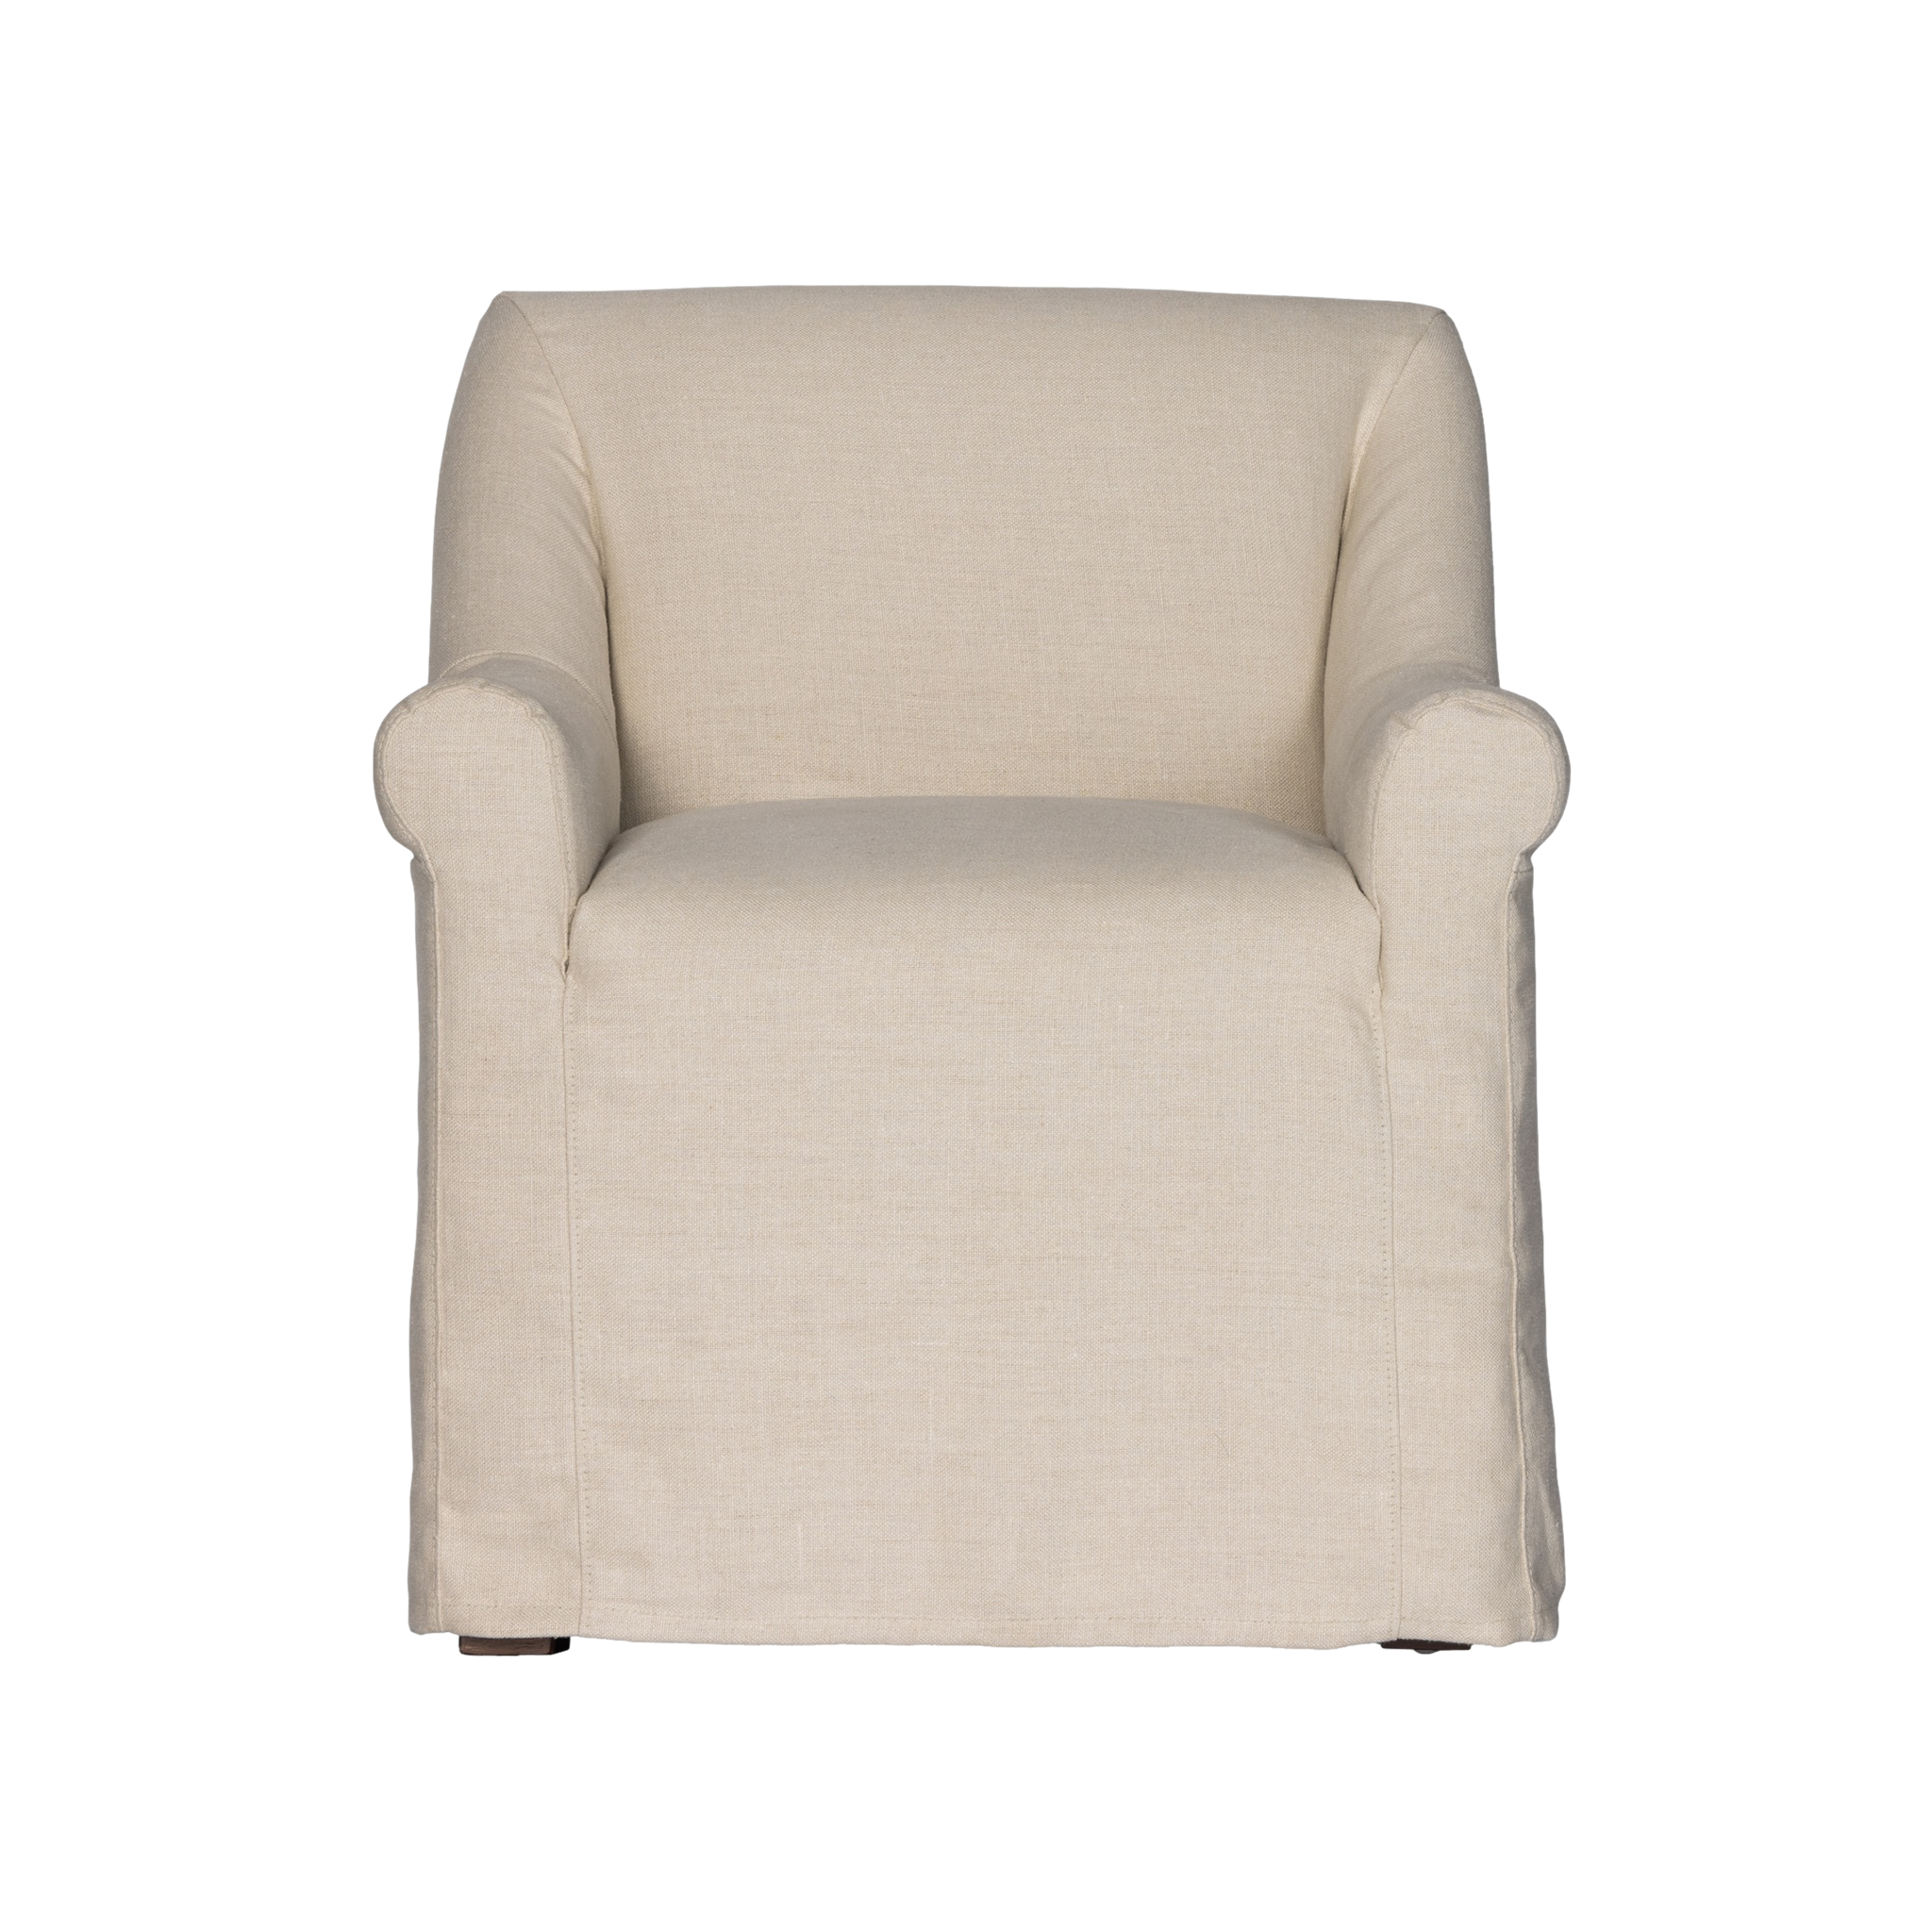 Bridges Slipcover Dining Chair in Natural